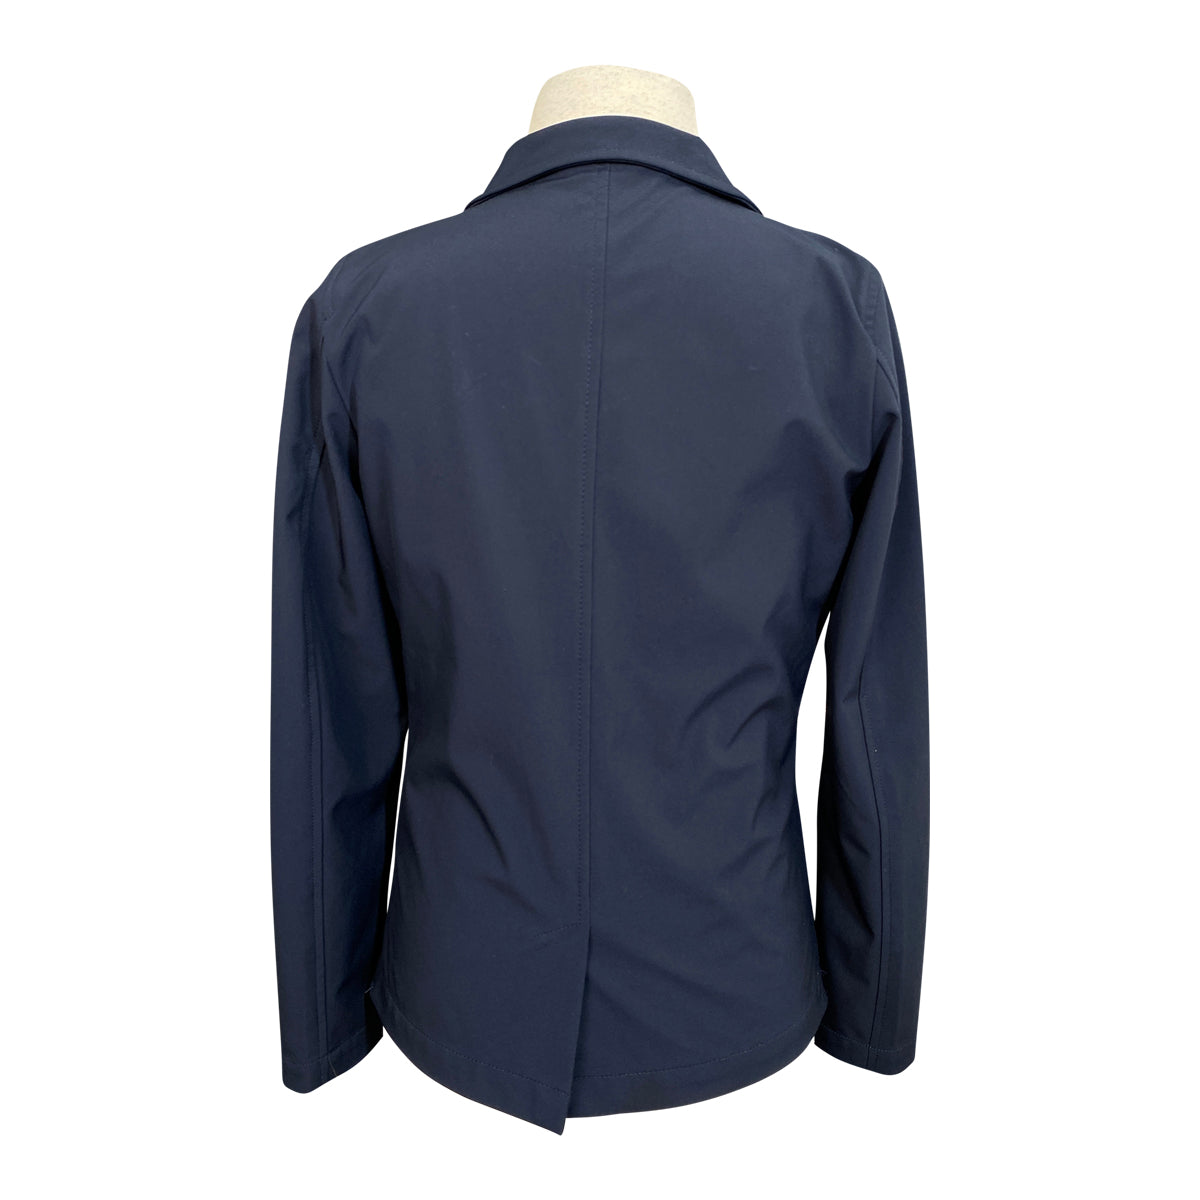 Horseware Kids' Competition Jacket in Navy